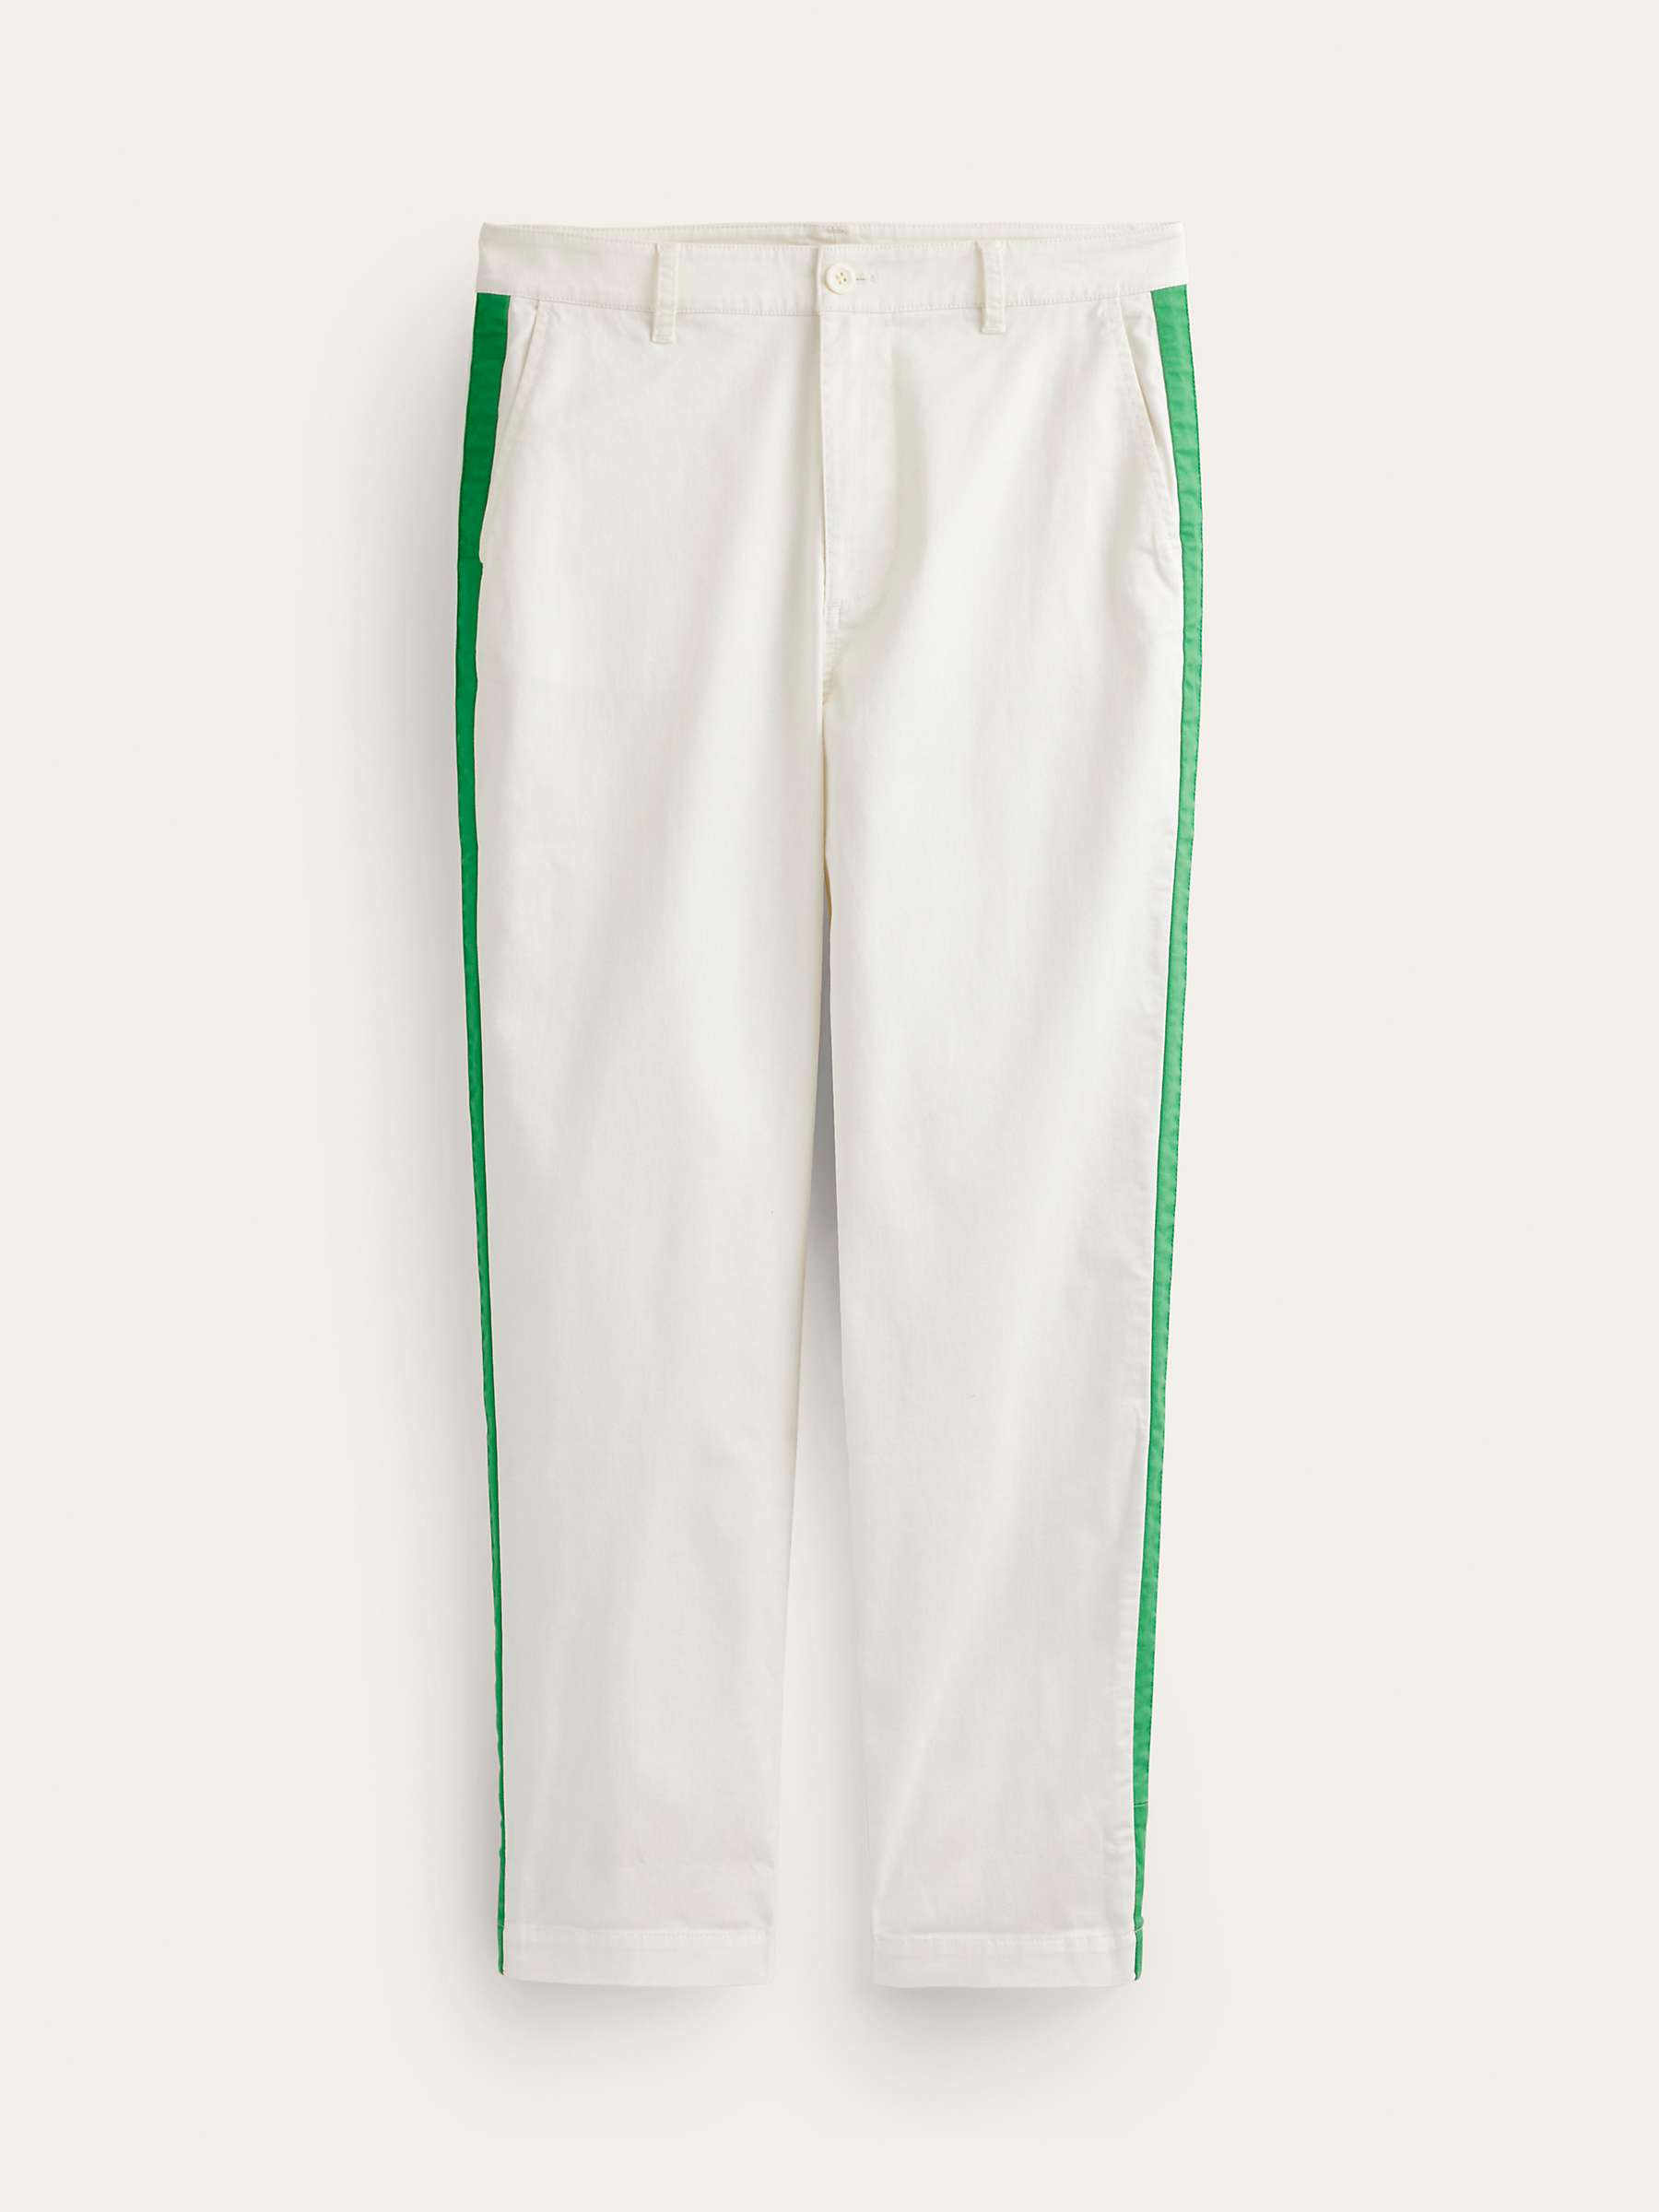 Buy Boden Barnsbury Side Stripe Chinos, Ivory/Green Online at johnlewis.com